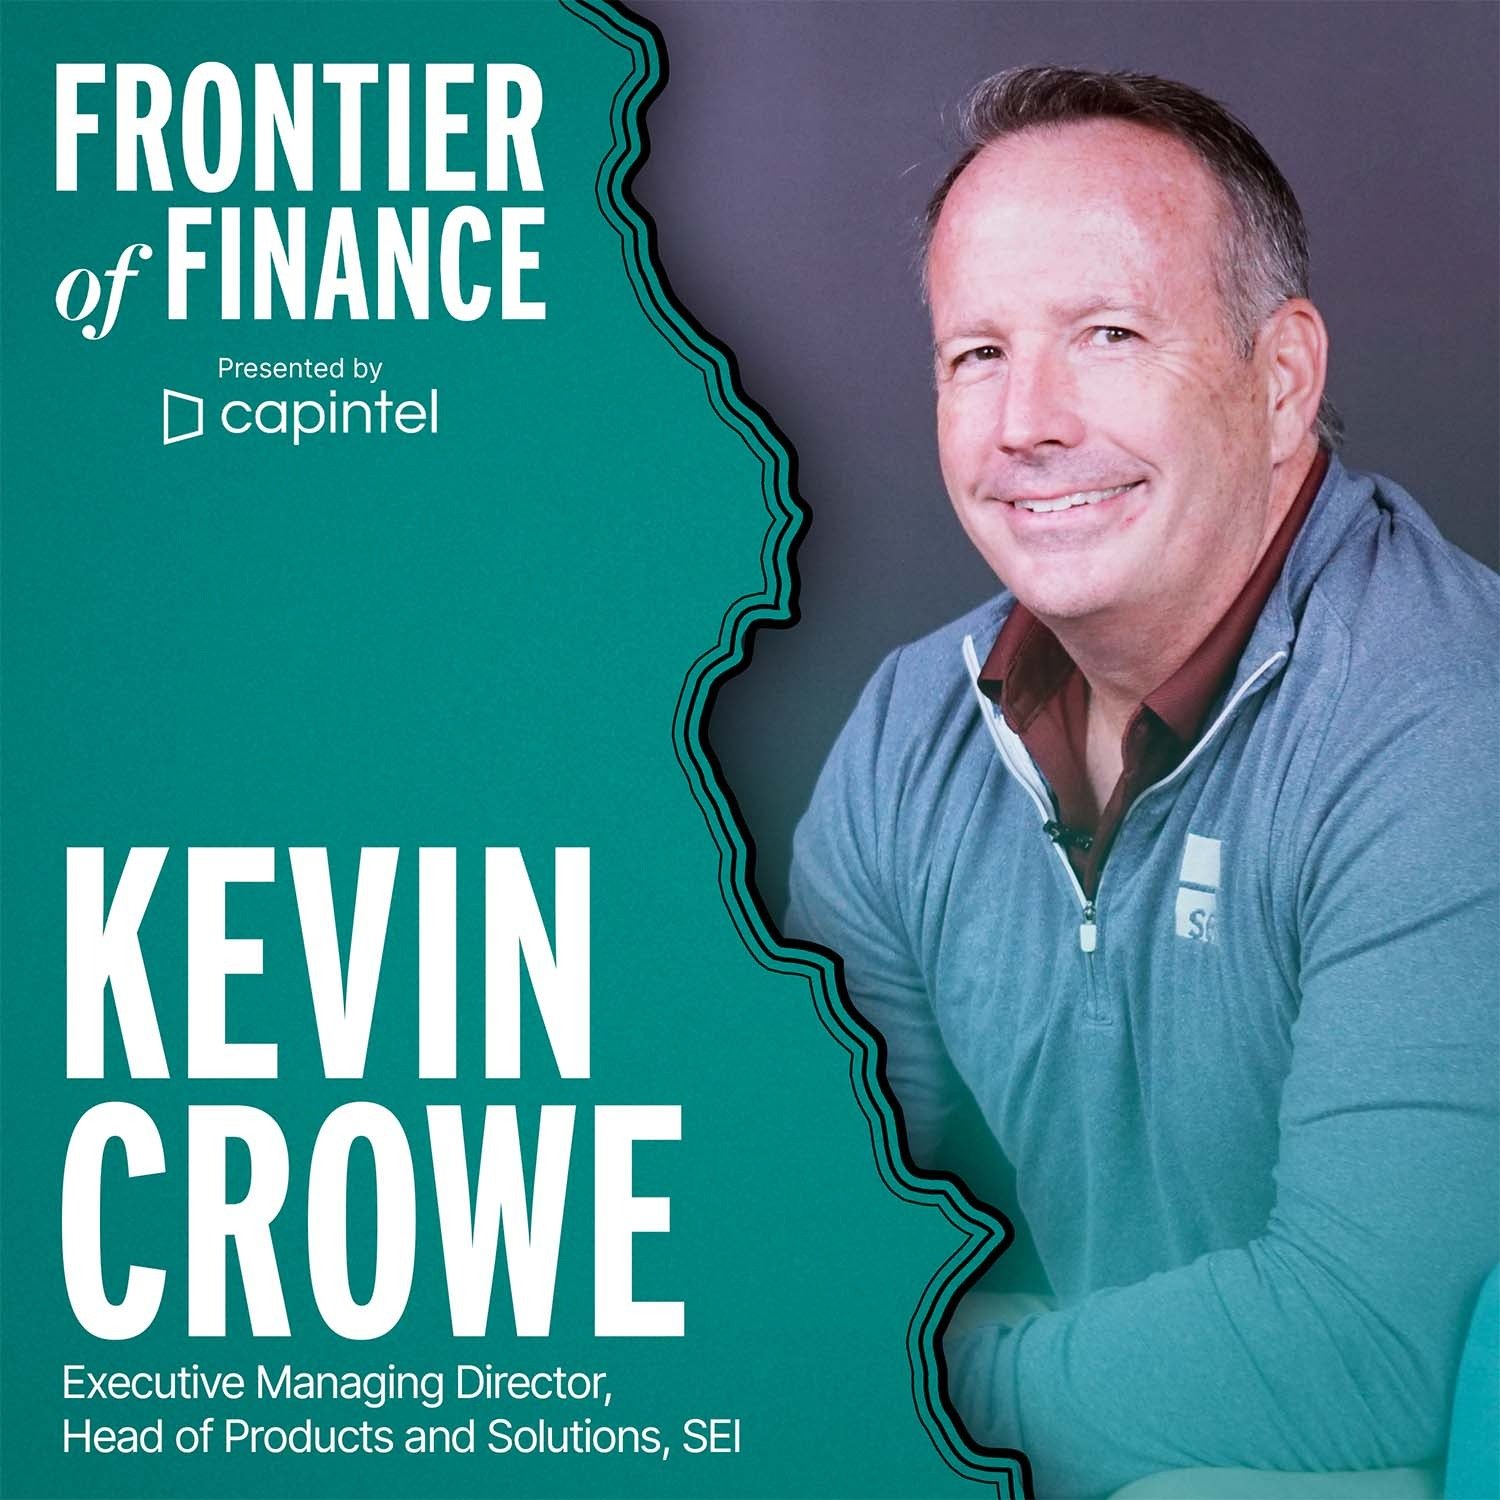 How to Make Meaningful Client Connections with Kevin Crowe and SEI